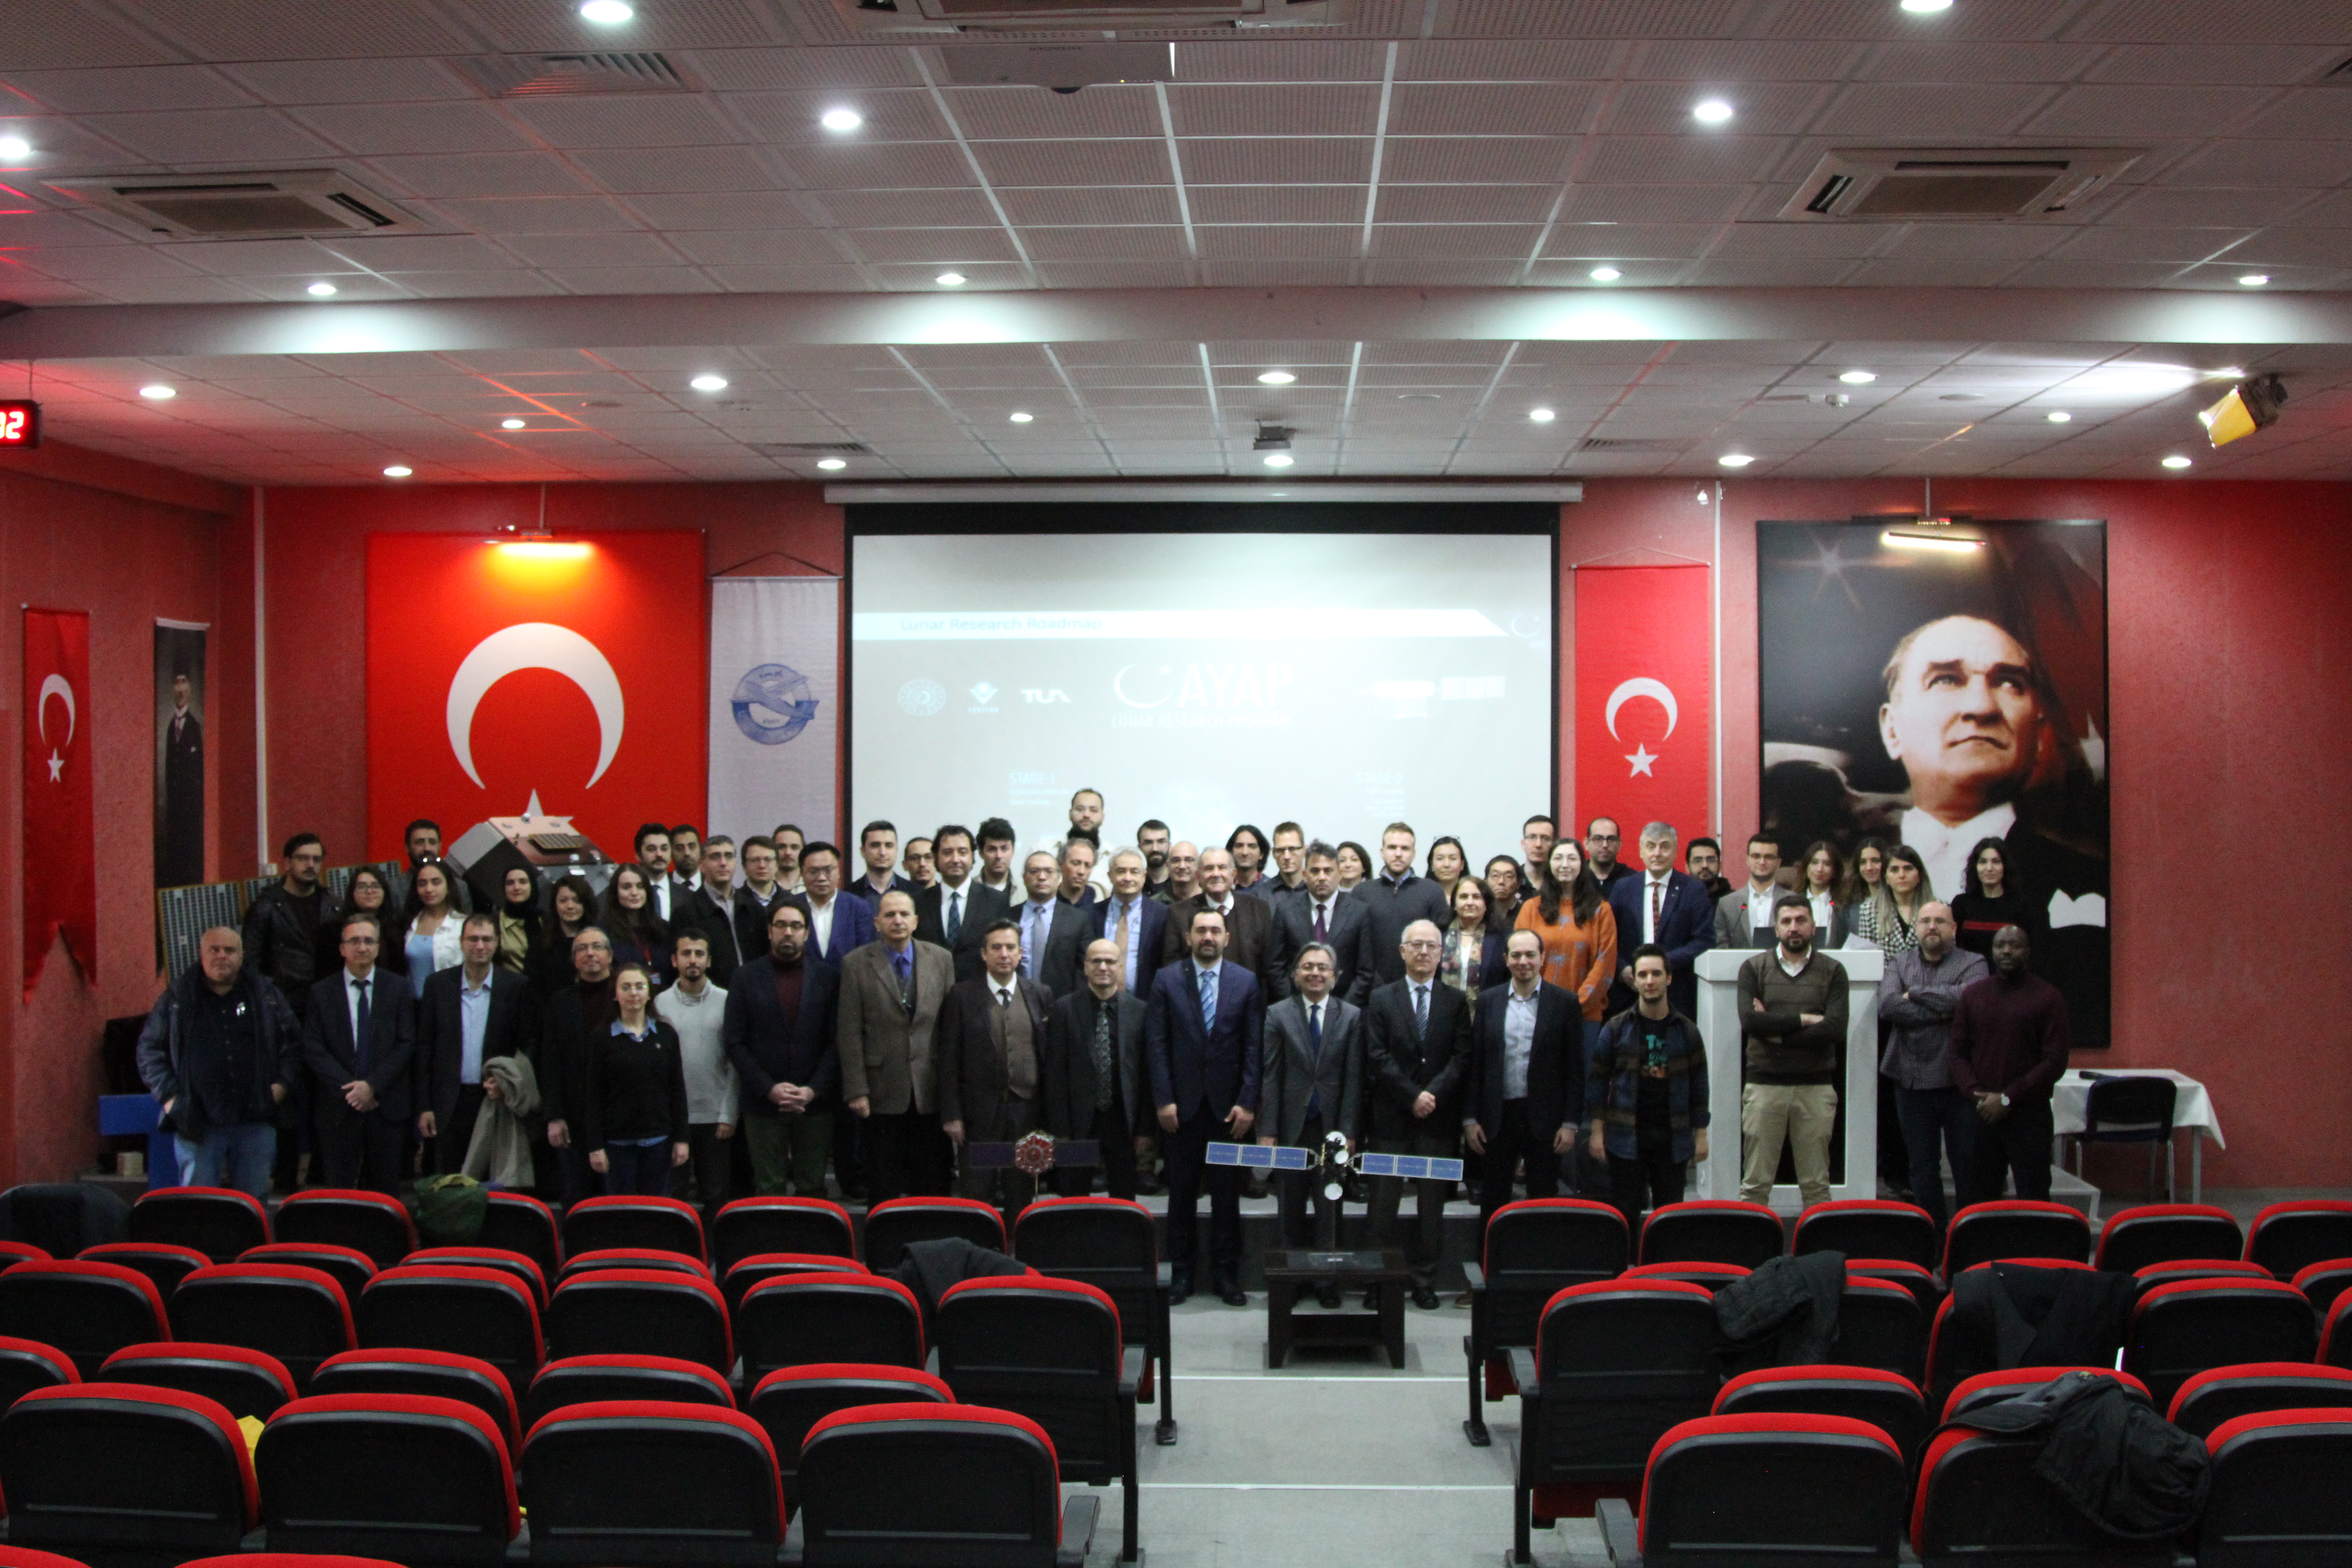 The 2nd Scientific Working Team Meeting of the National Moon Programme was Held At Our University